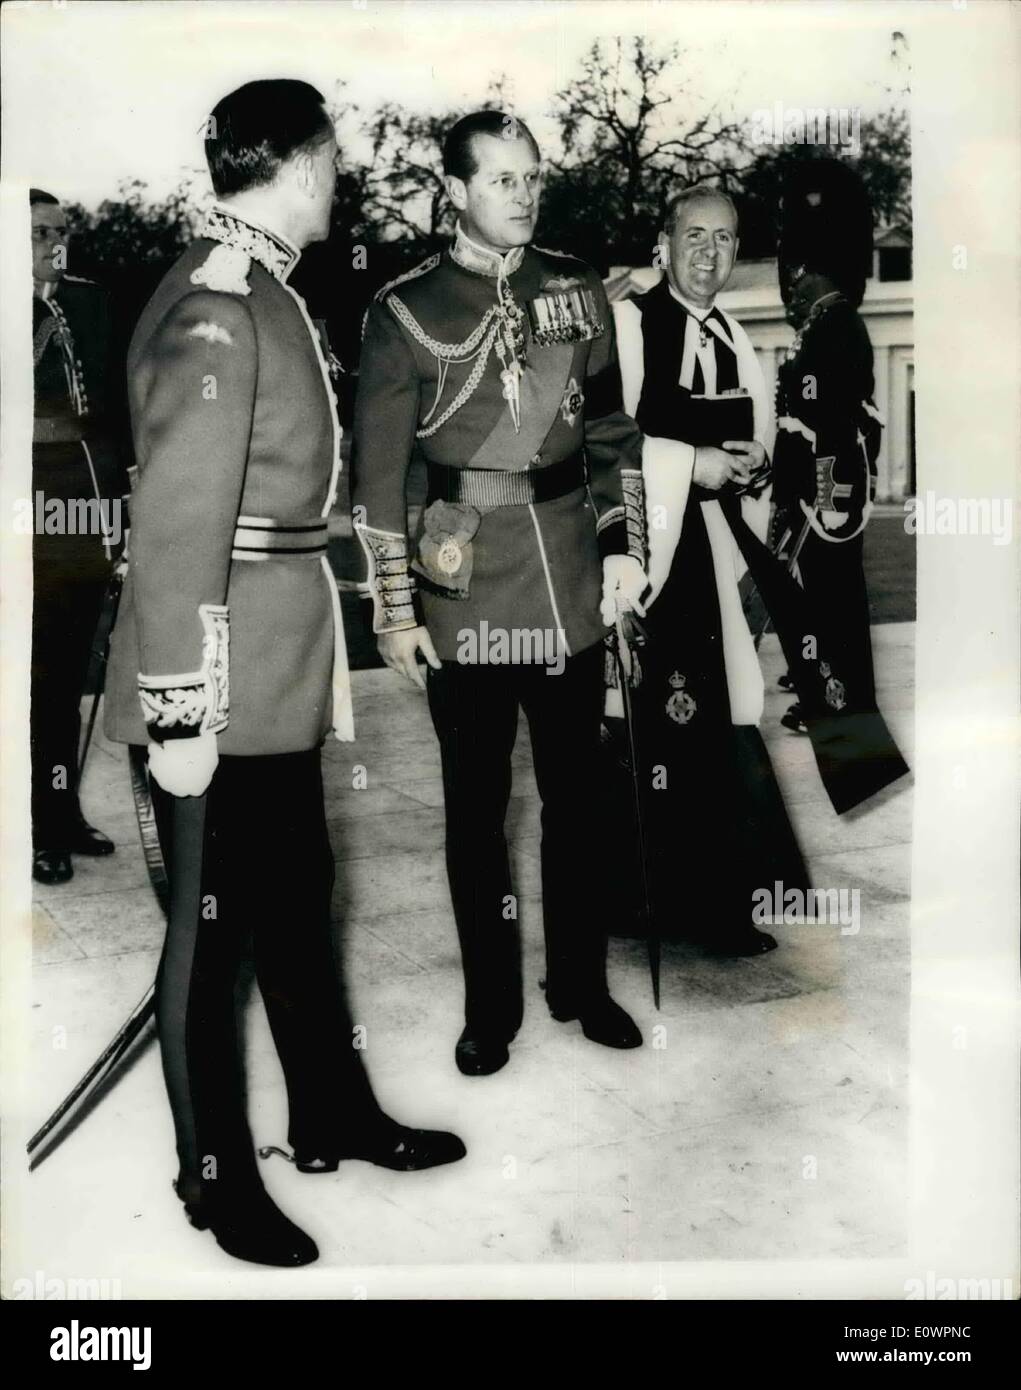 Nov. 11, 1963 - The Duke at dedication. H.R.H.prince Philip , duke of Edinburgh, today represented The queen at the dedication ceremony of the new guard's chapel at wellington barracks . The duke went to the service only shortly after returning from president Kennedy's funeral in Washington. photo shows princes Philip arrives for the service. Stock Photo